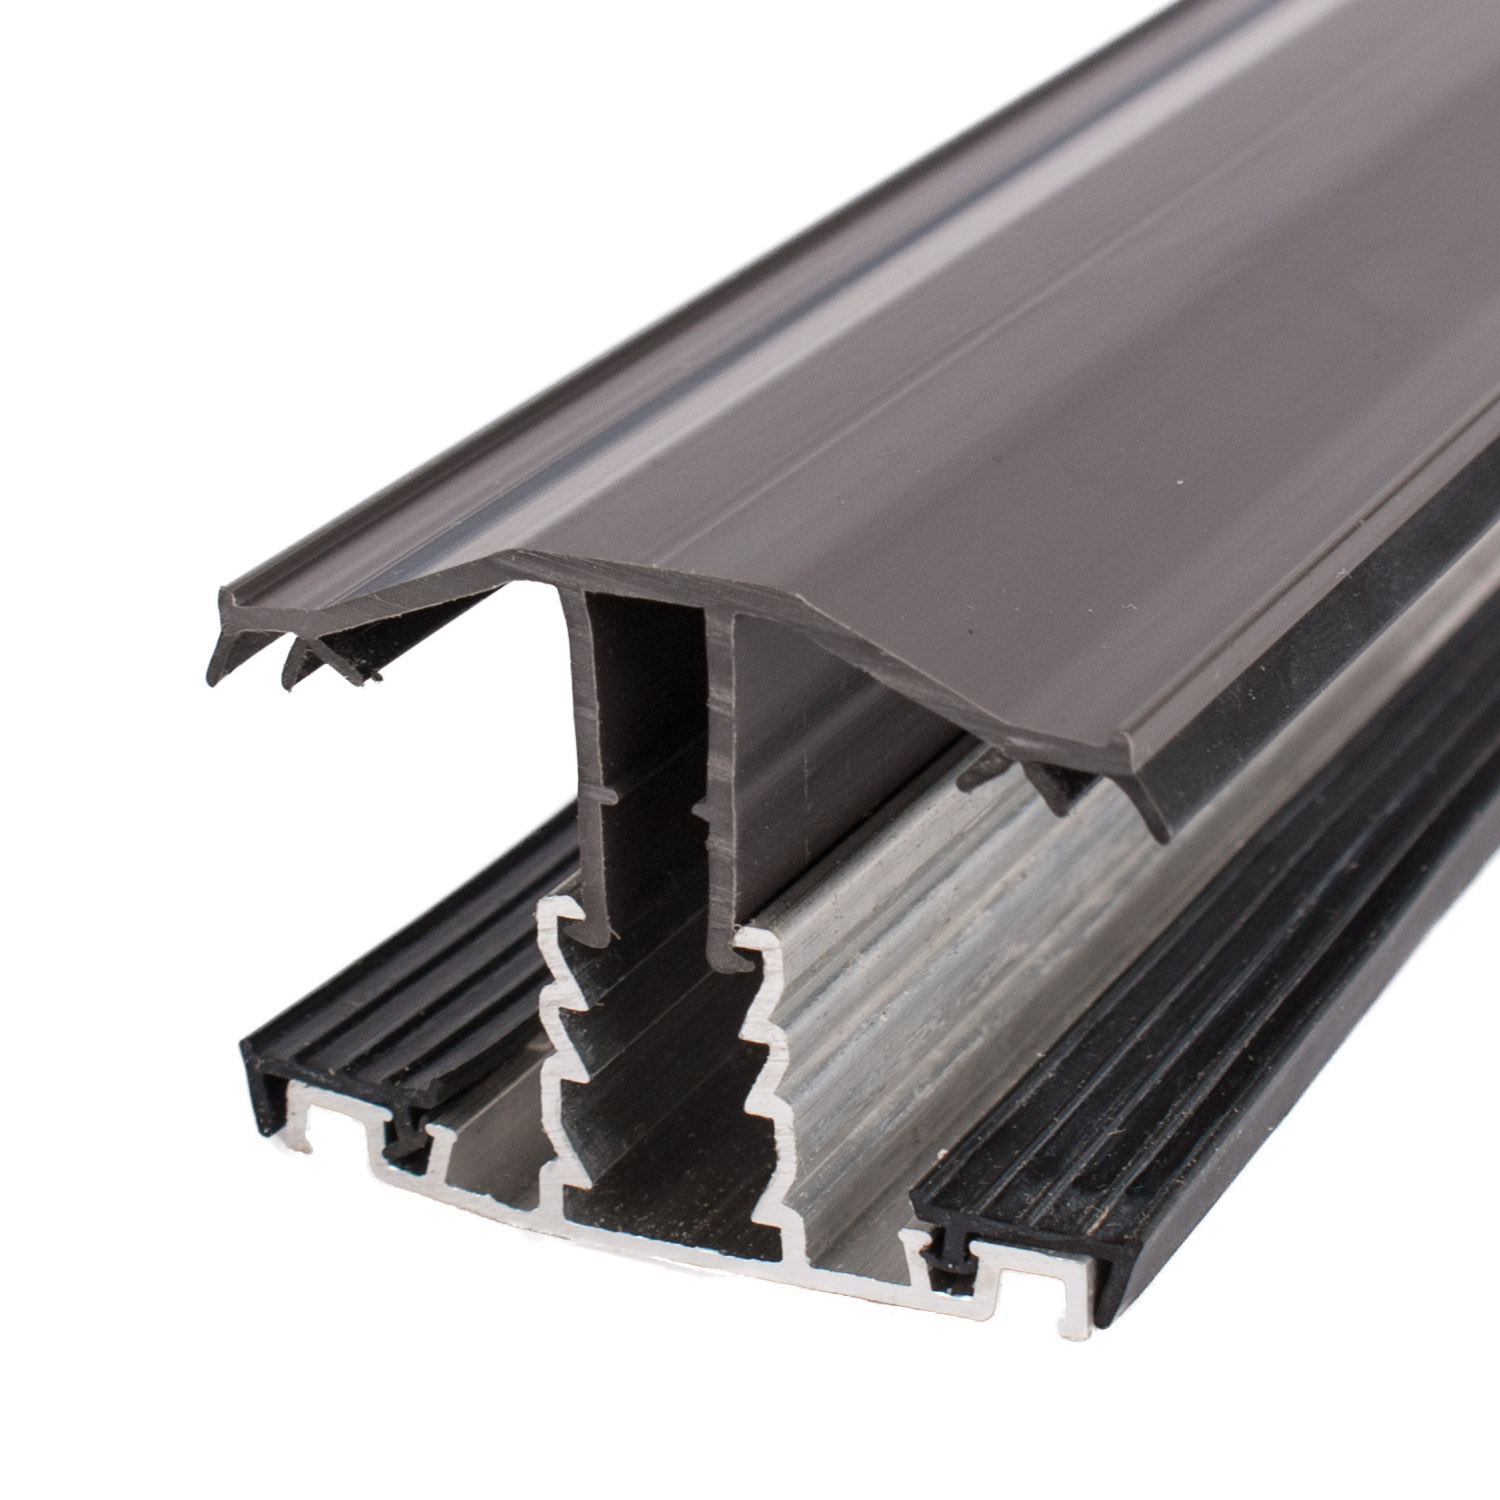 3m lengths and gasket sizes available Dark Brown Aluminium Screw Down 60mm Main Rafter Bar for Glass or Polycarbonate Conservatory Roof Various colours